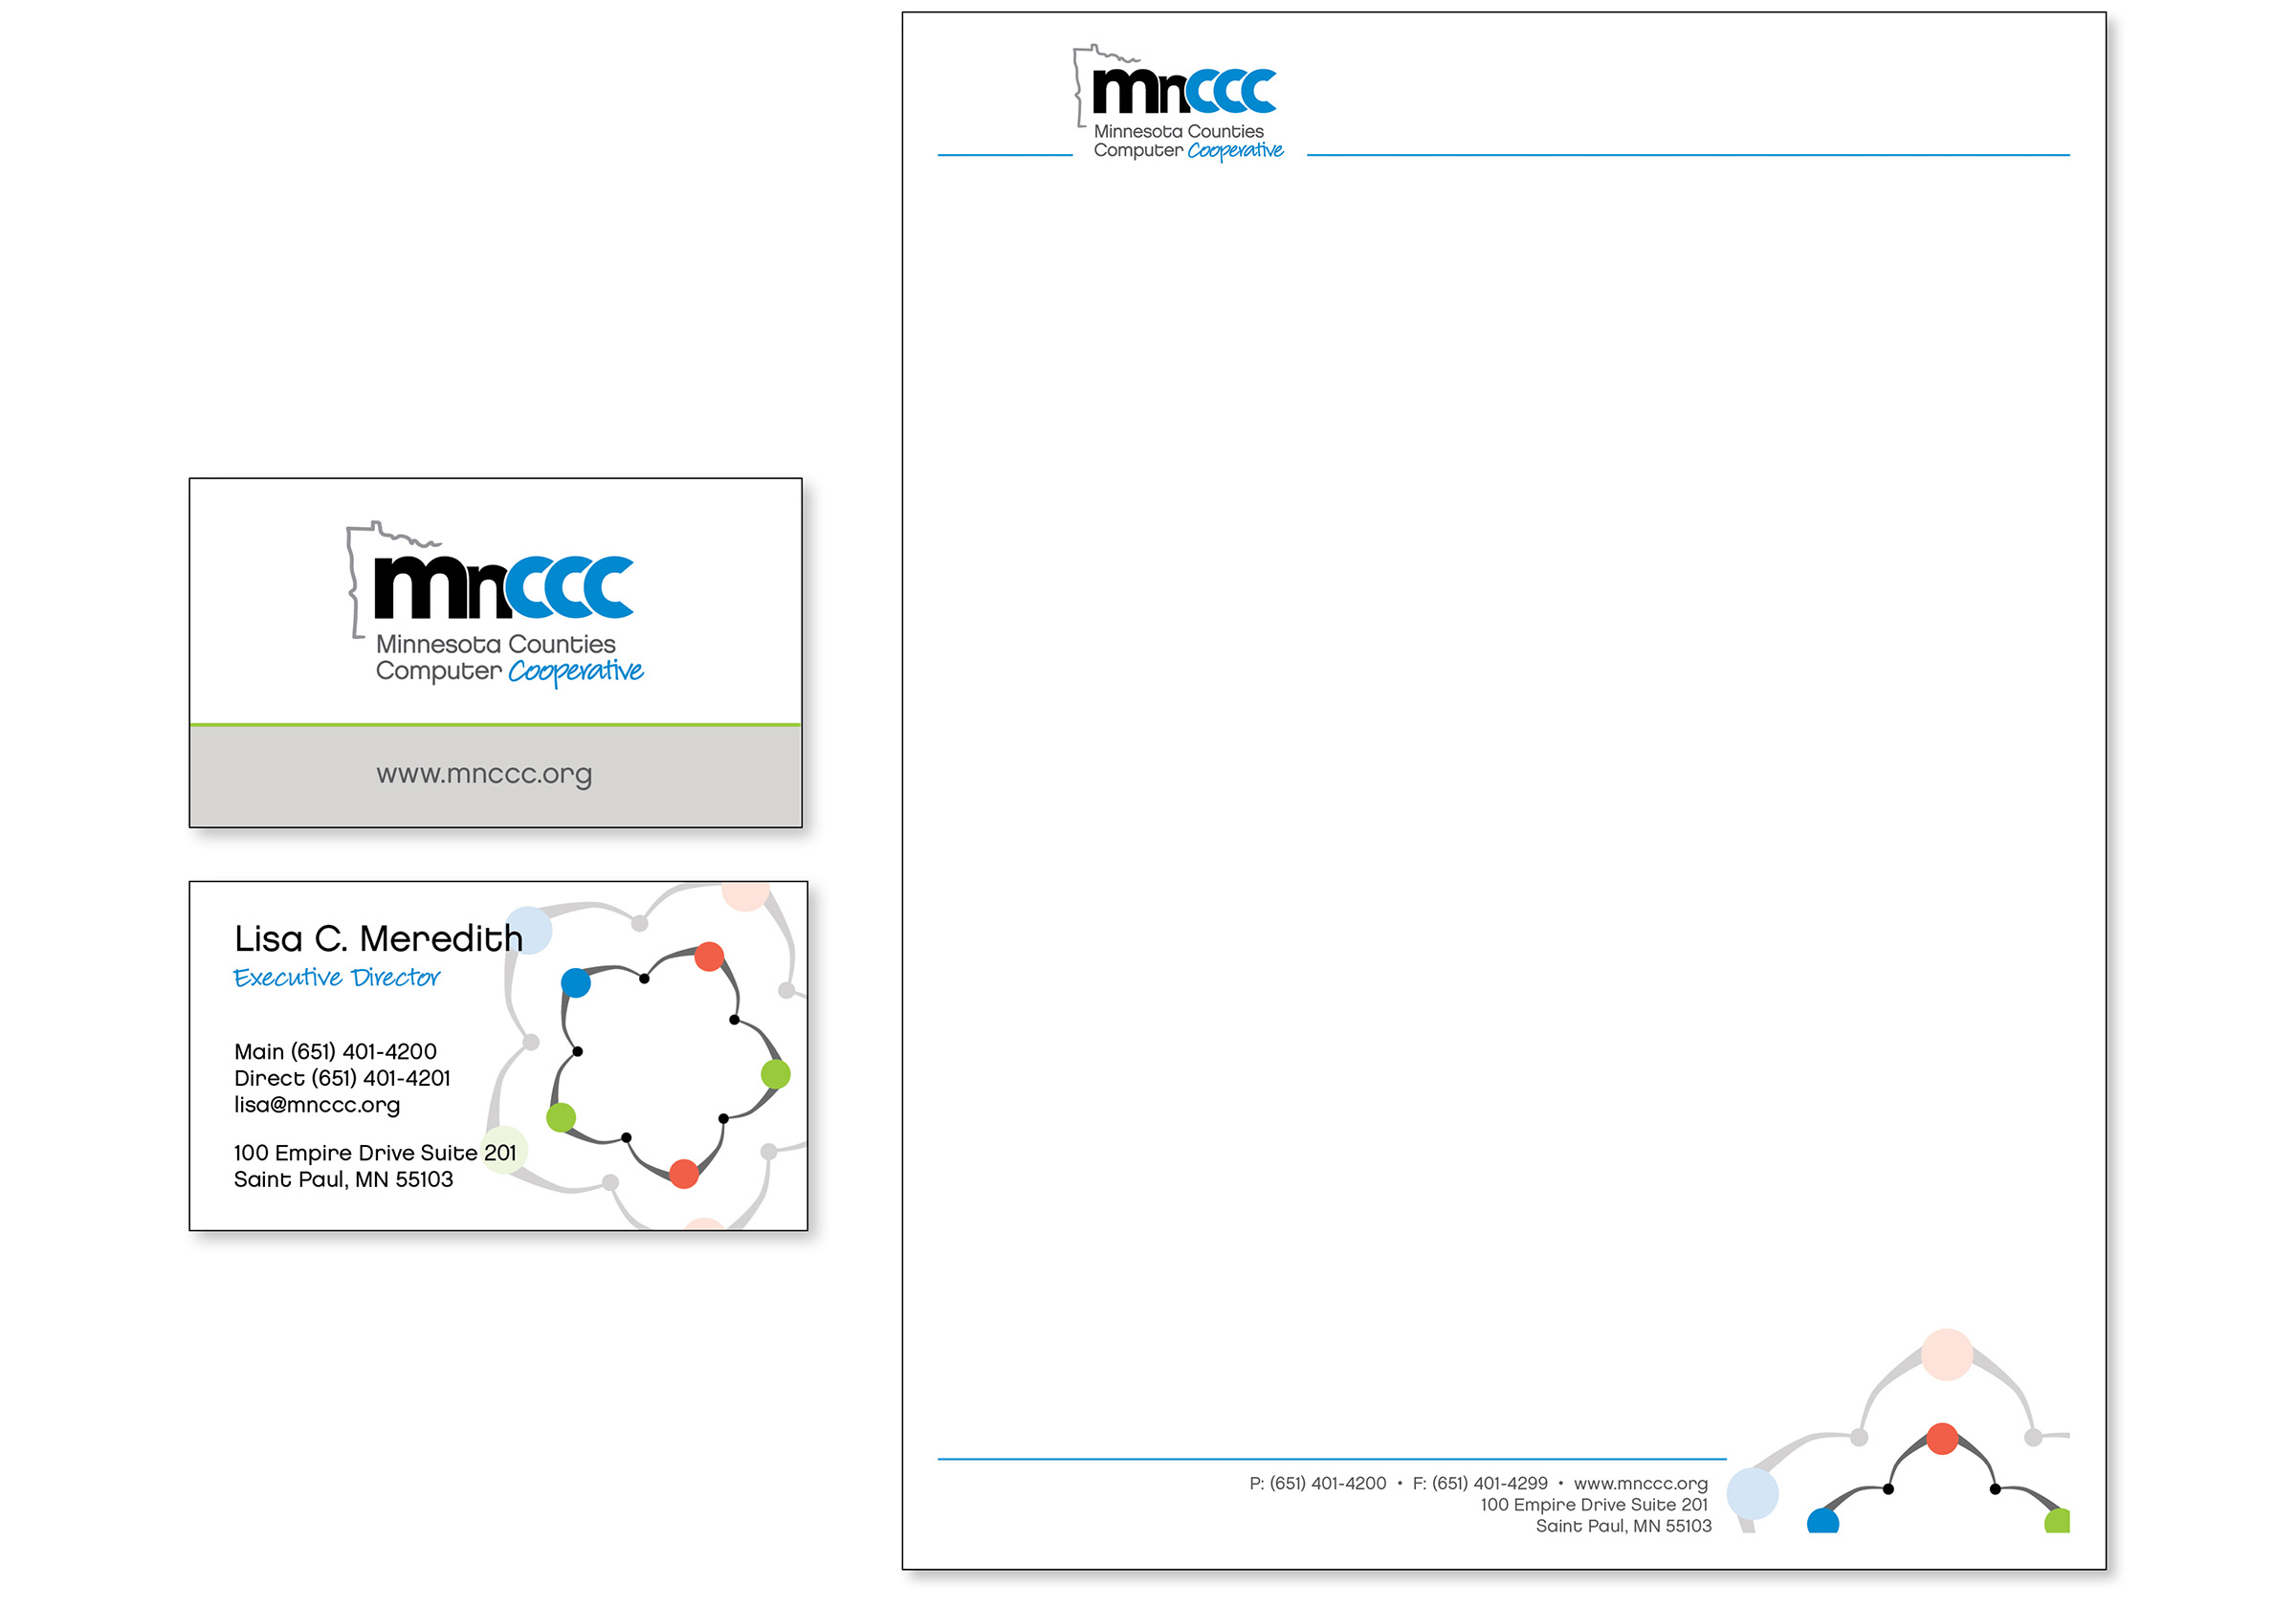 Image showing designs of identity materials created for MnCCC, including business cards and letterhead.